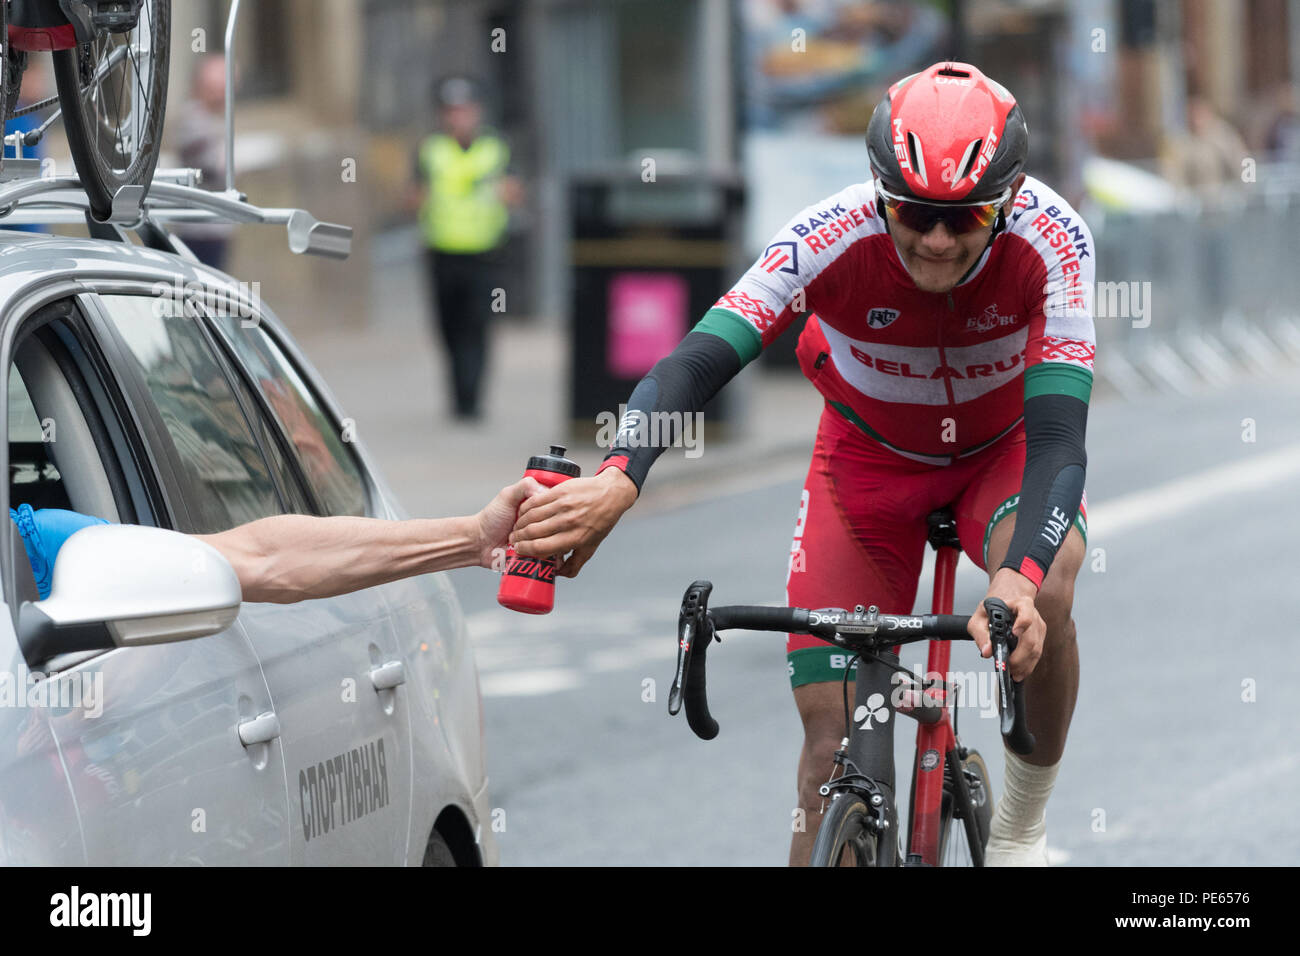 Glasgow, Scotland, UK - 12 August 2018: European Championships 2018 -  Sticky bottle?  a competitor in the men's road race first spotted by photographer at 15:35:05 appearing to take a water bottle from his support car during a hill climb in Glasgow city centre.  Subsequent photographs show that at 15:35.13 he was still holding onto the bottle (photo 2 of 3 see also images PE6578 and PE6575) Credit: Kay Roxby/Alamy Live News Stock Photo